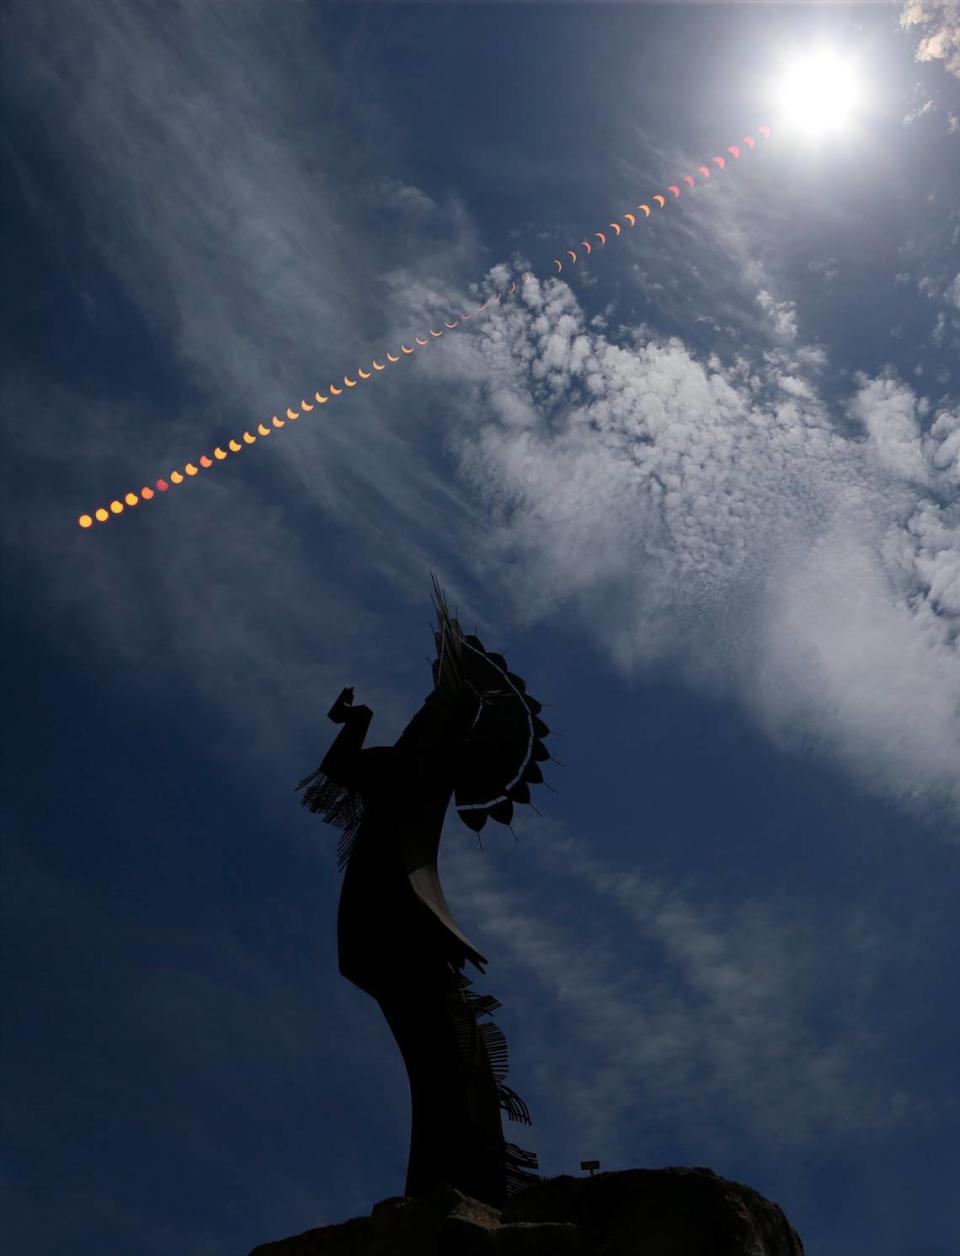 A partial eclipse of the sun fills the sky over The Keeper of the Plains on August 21, 2017. The photo is comprised images taken every three minutes throughout the eclipse.